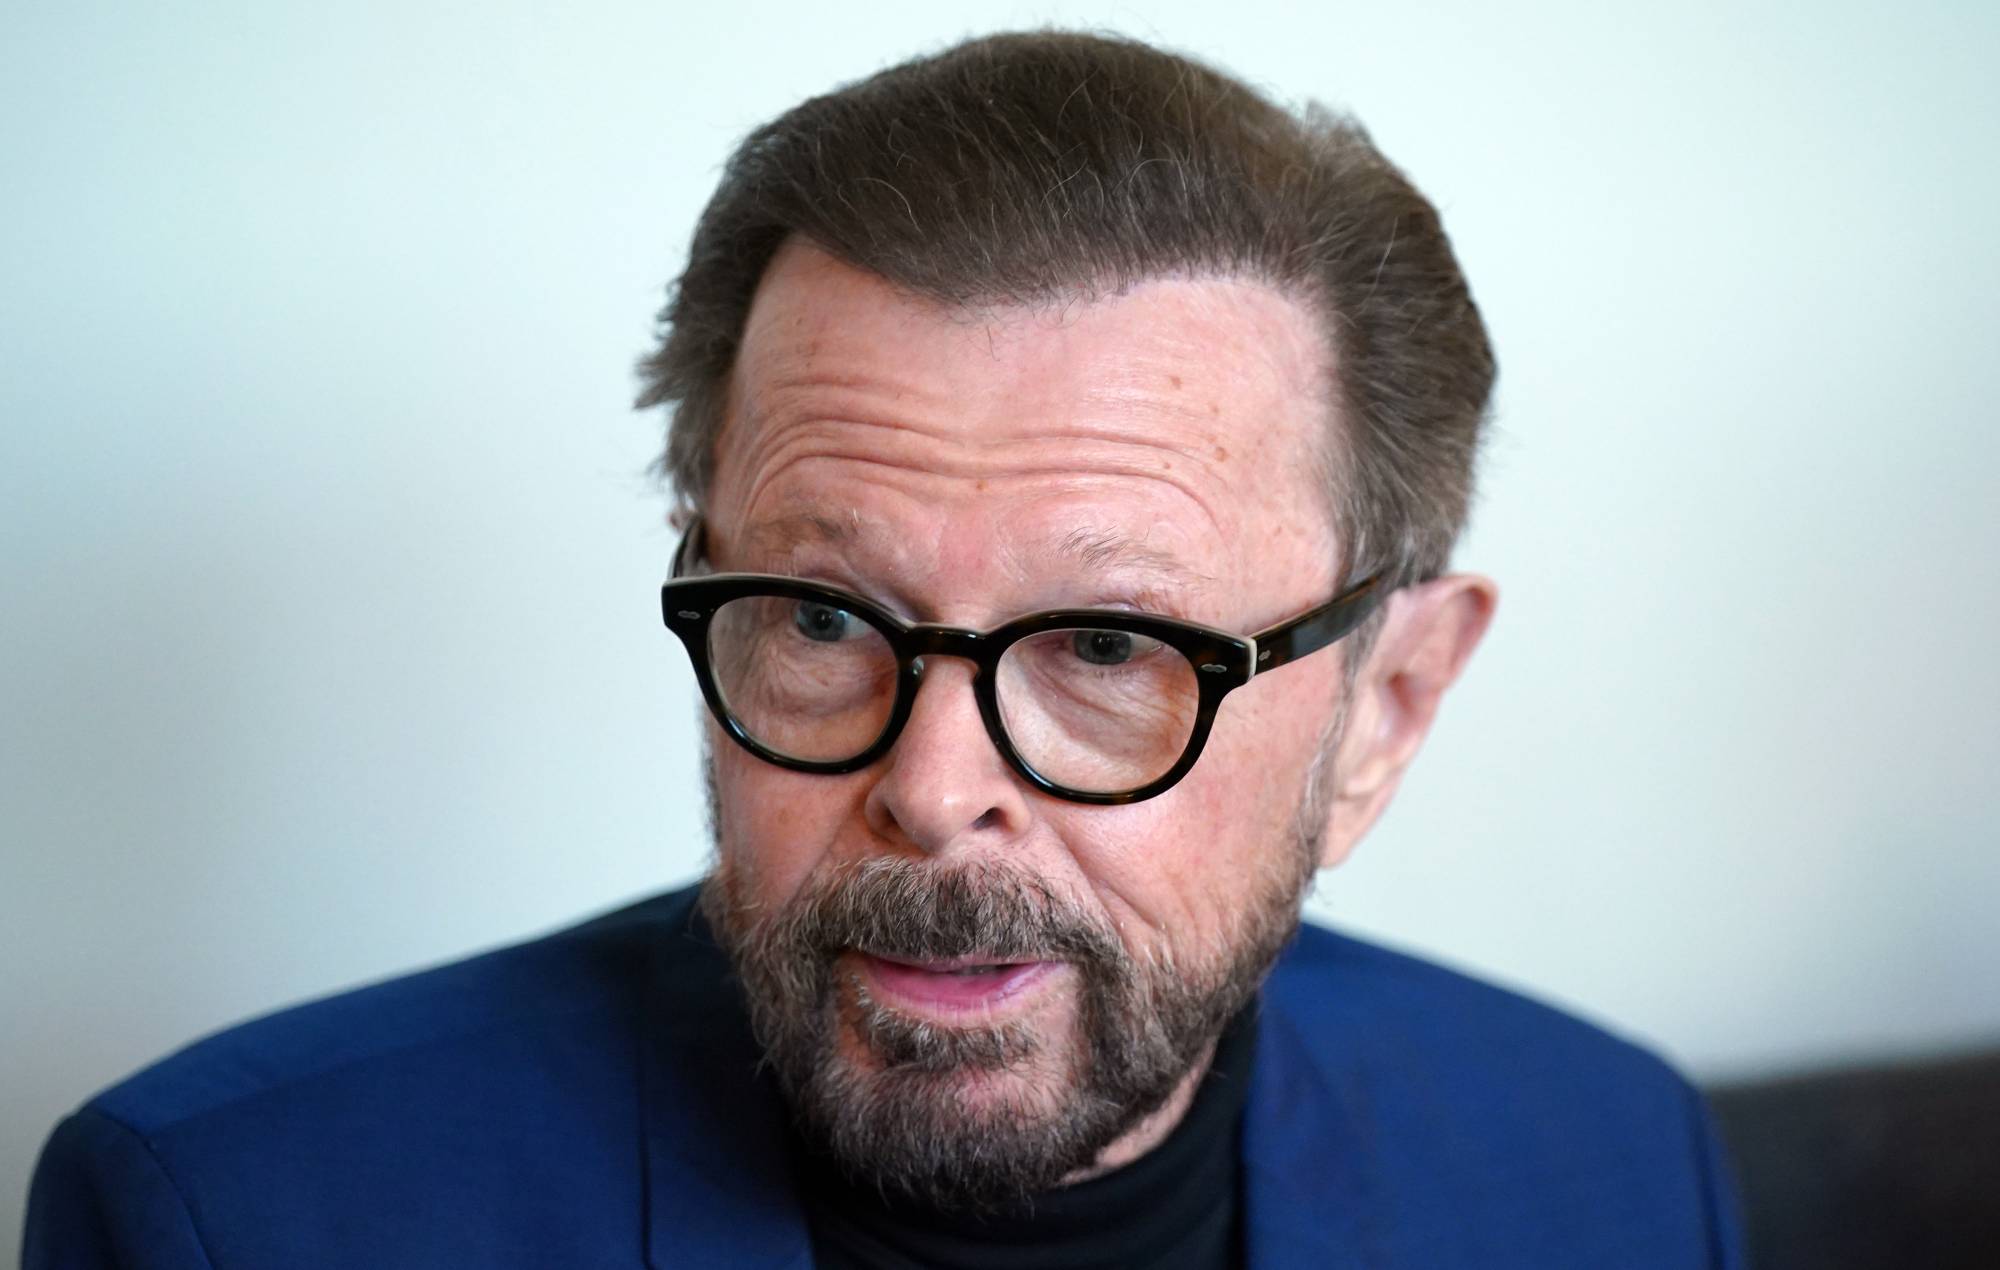 ABBA’s Bjorn Ulvaeus warns of “challenge” AI will bring to music industry